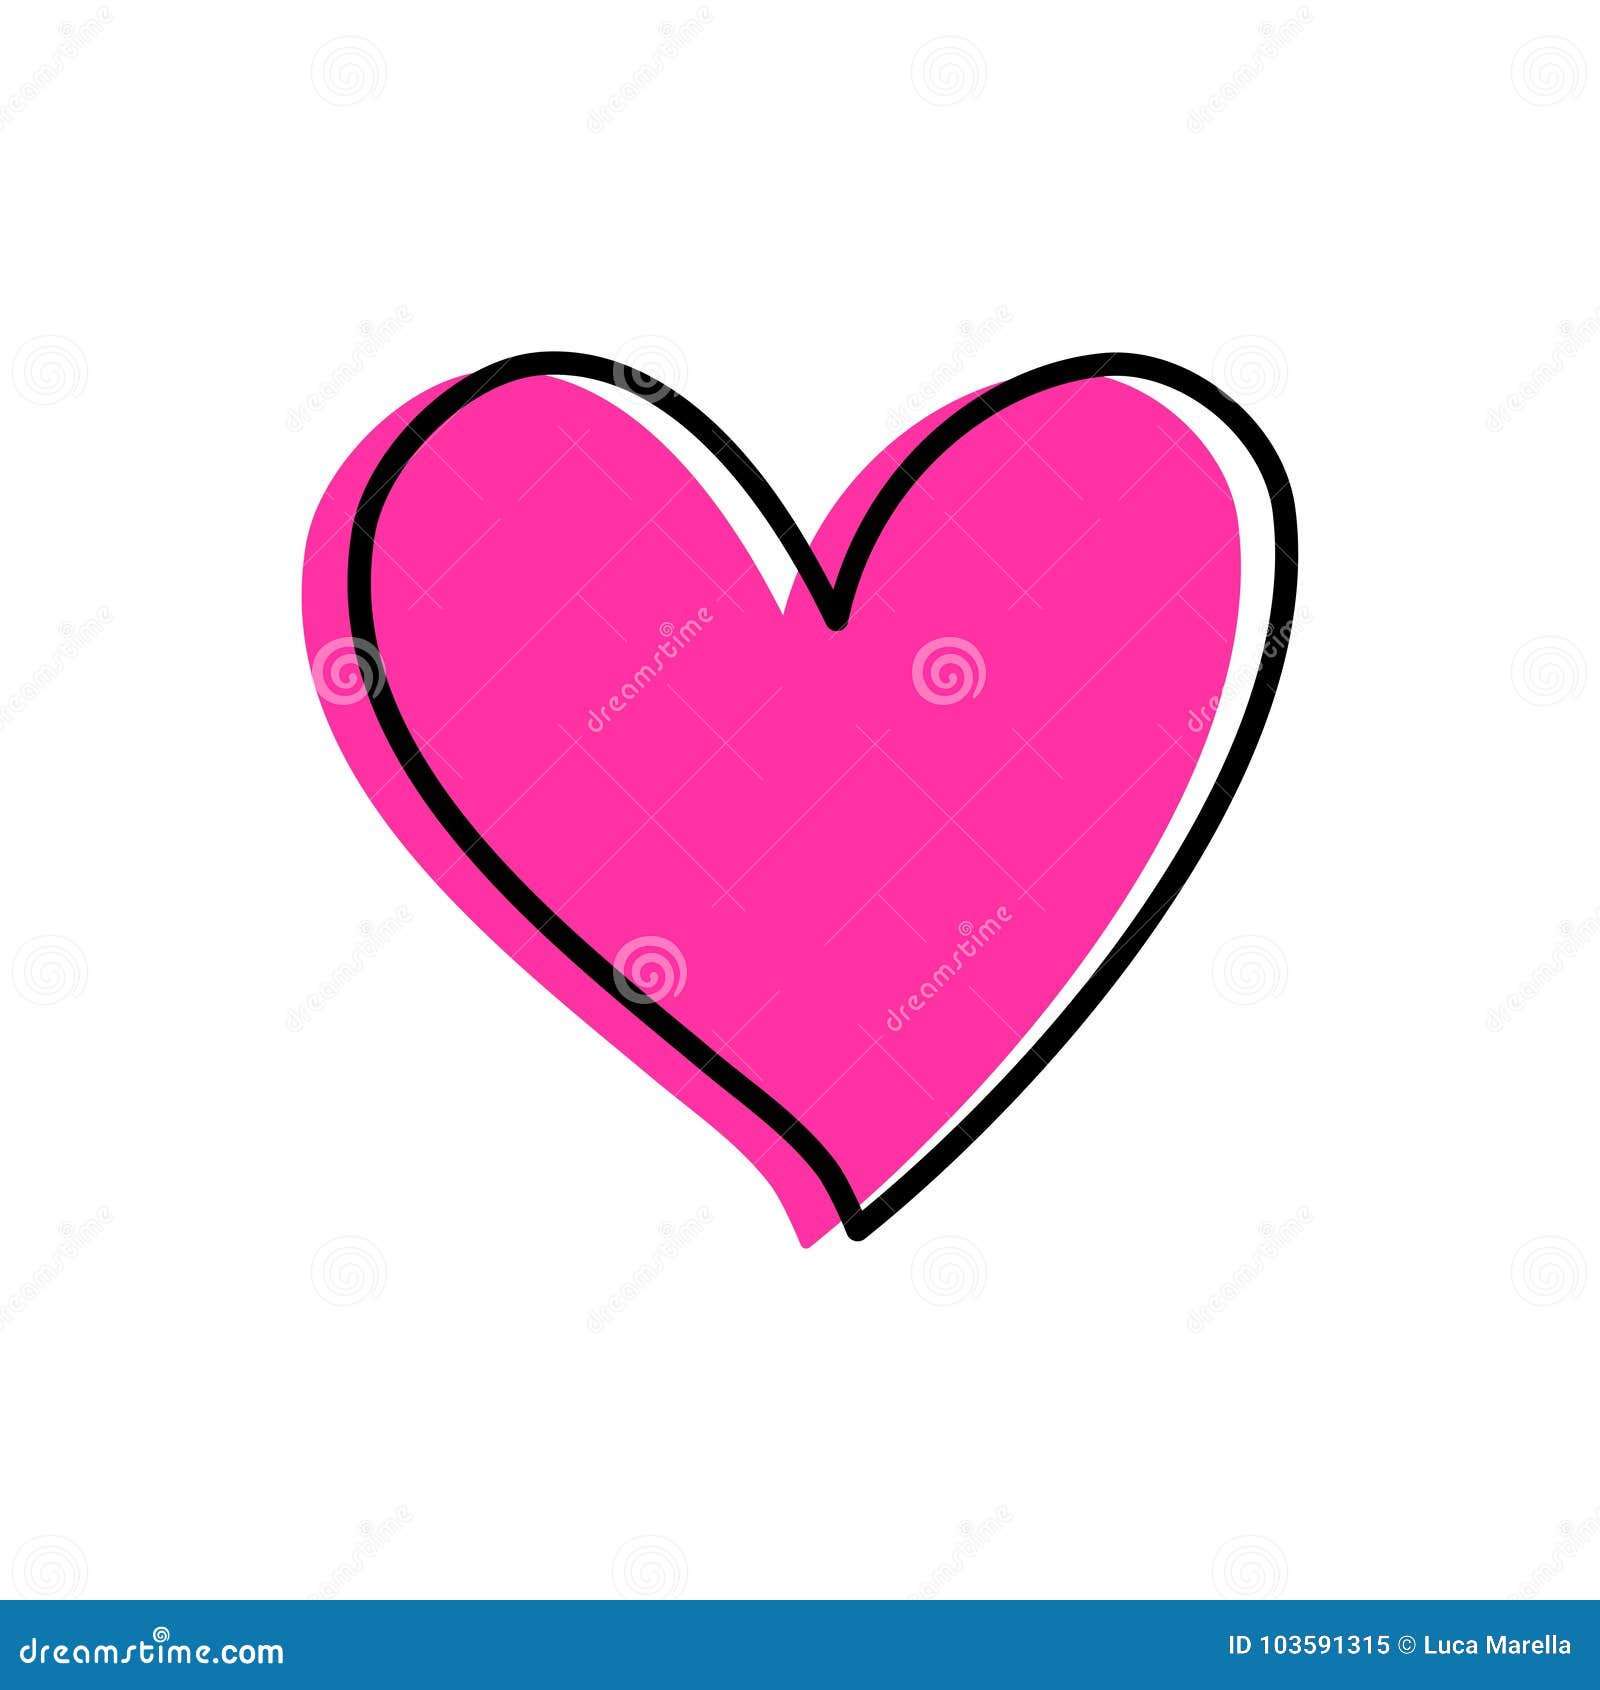 Hand Drawn Style Pink Heart Stock Vector - Illustration of celebration,  event: 103591315